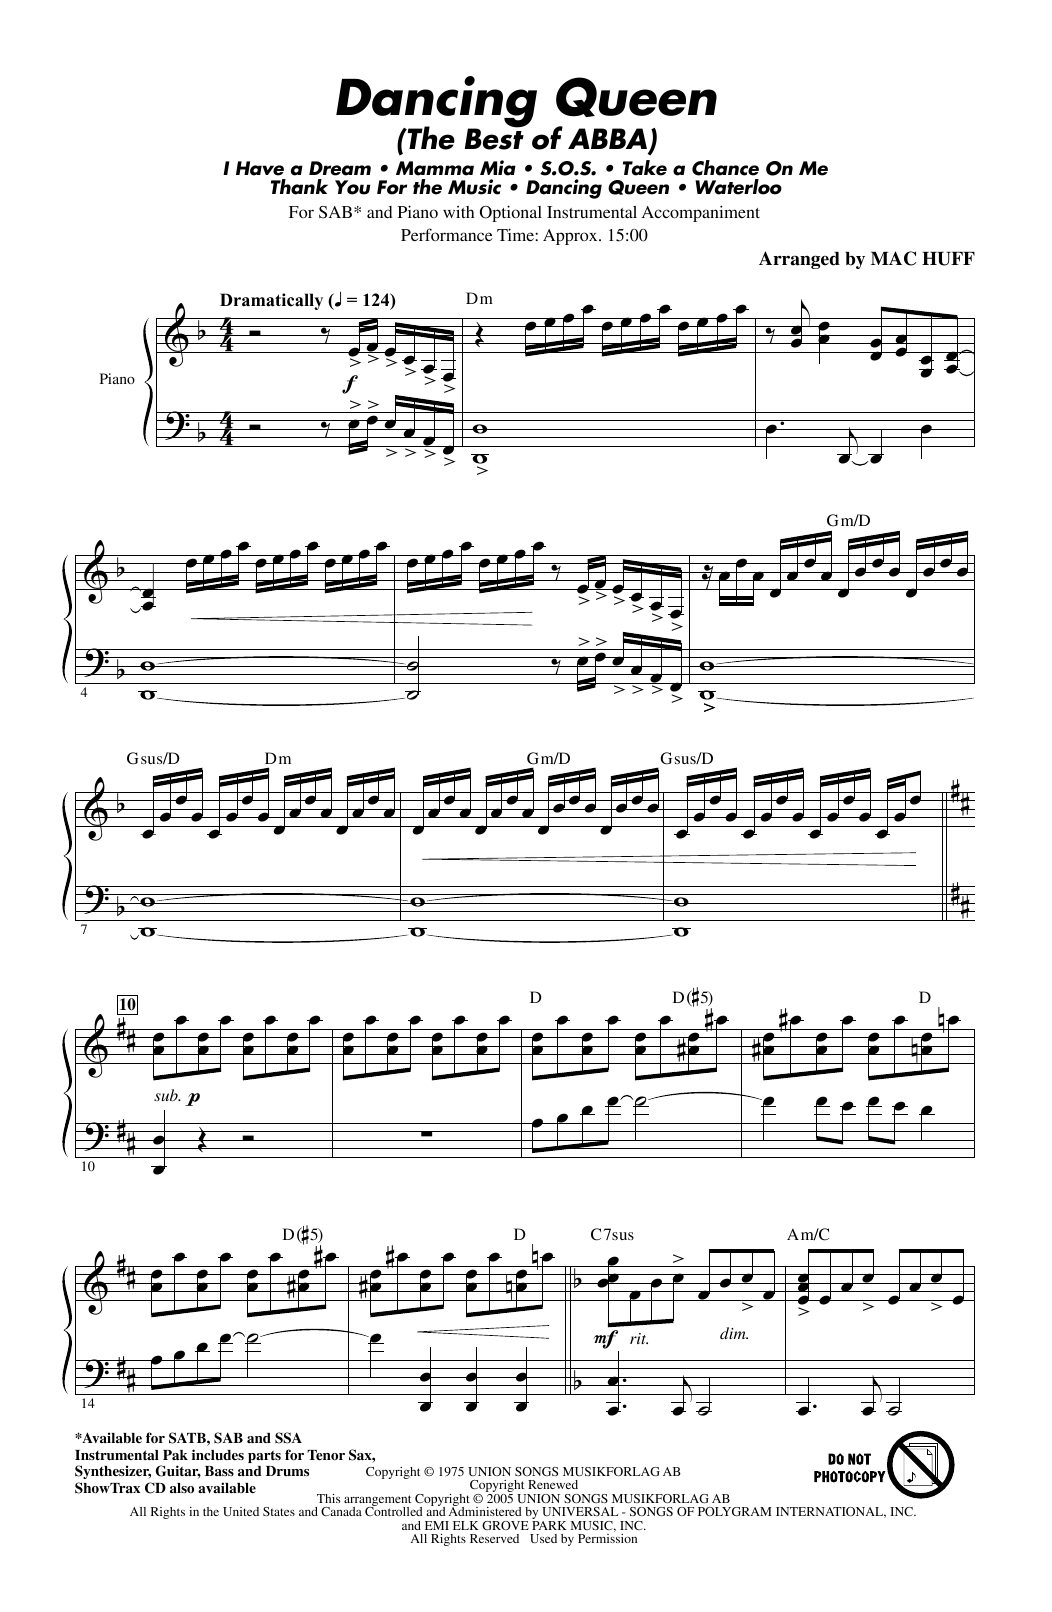 ABBA Mamma Mia! - Highlights from the Movie Soundtrack (arr. Mac Huff) sheet music notes and chords. Download Printable PDF.